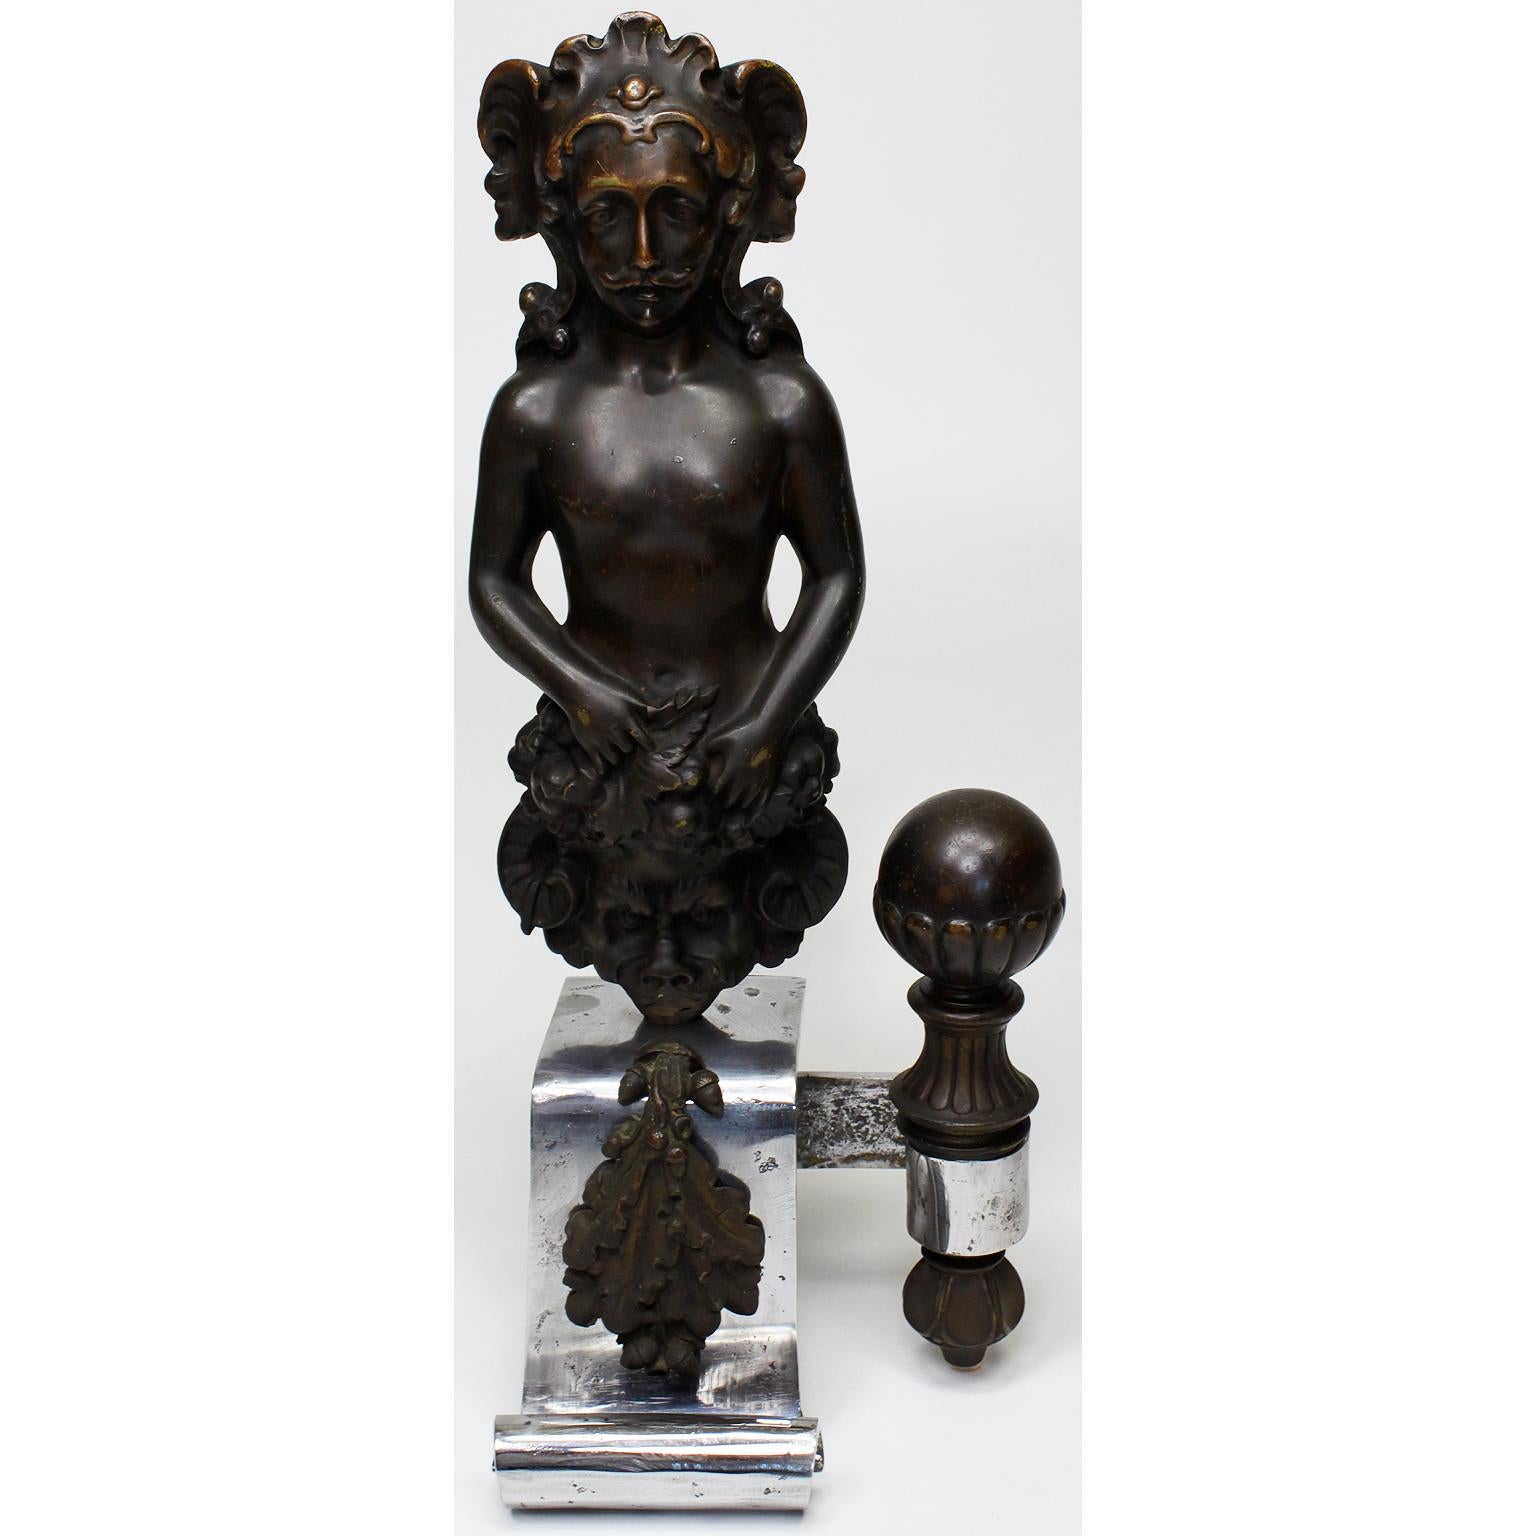 A pair of French 19th century Baroque Revival style steel and patinated bronze figural chenets (Andirons). Each with a posing male figure holding a satyr shield next to decorative sphere, both with wrought iron log-supports, circa